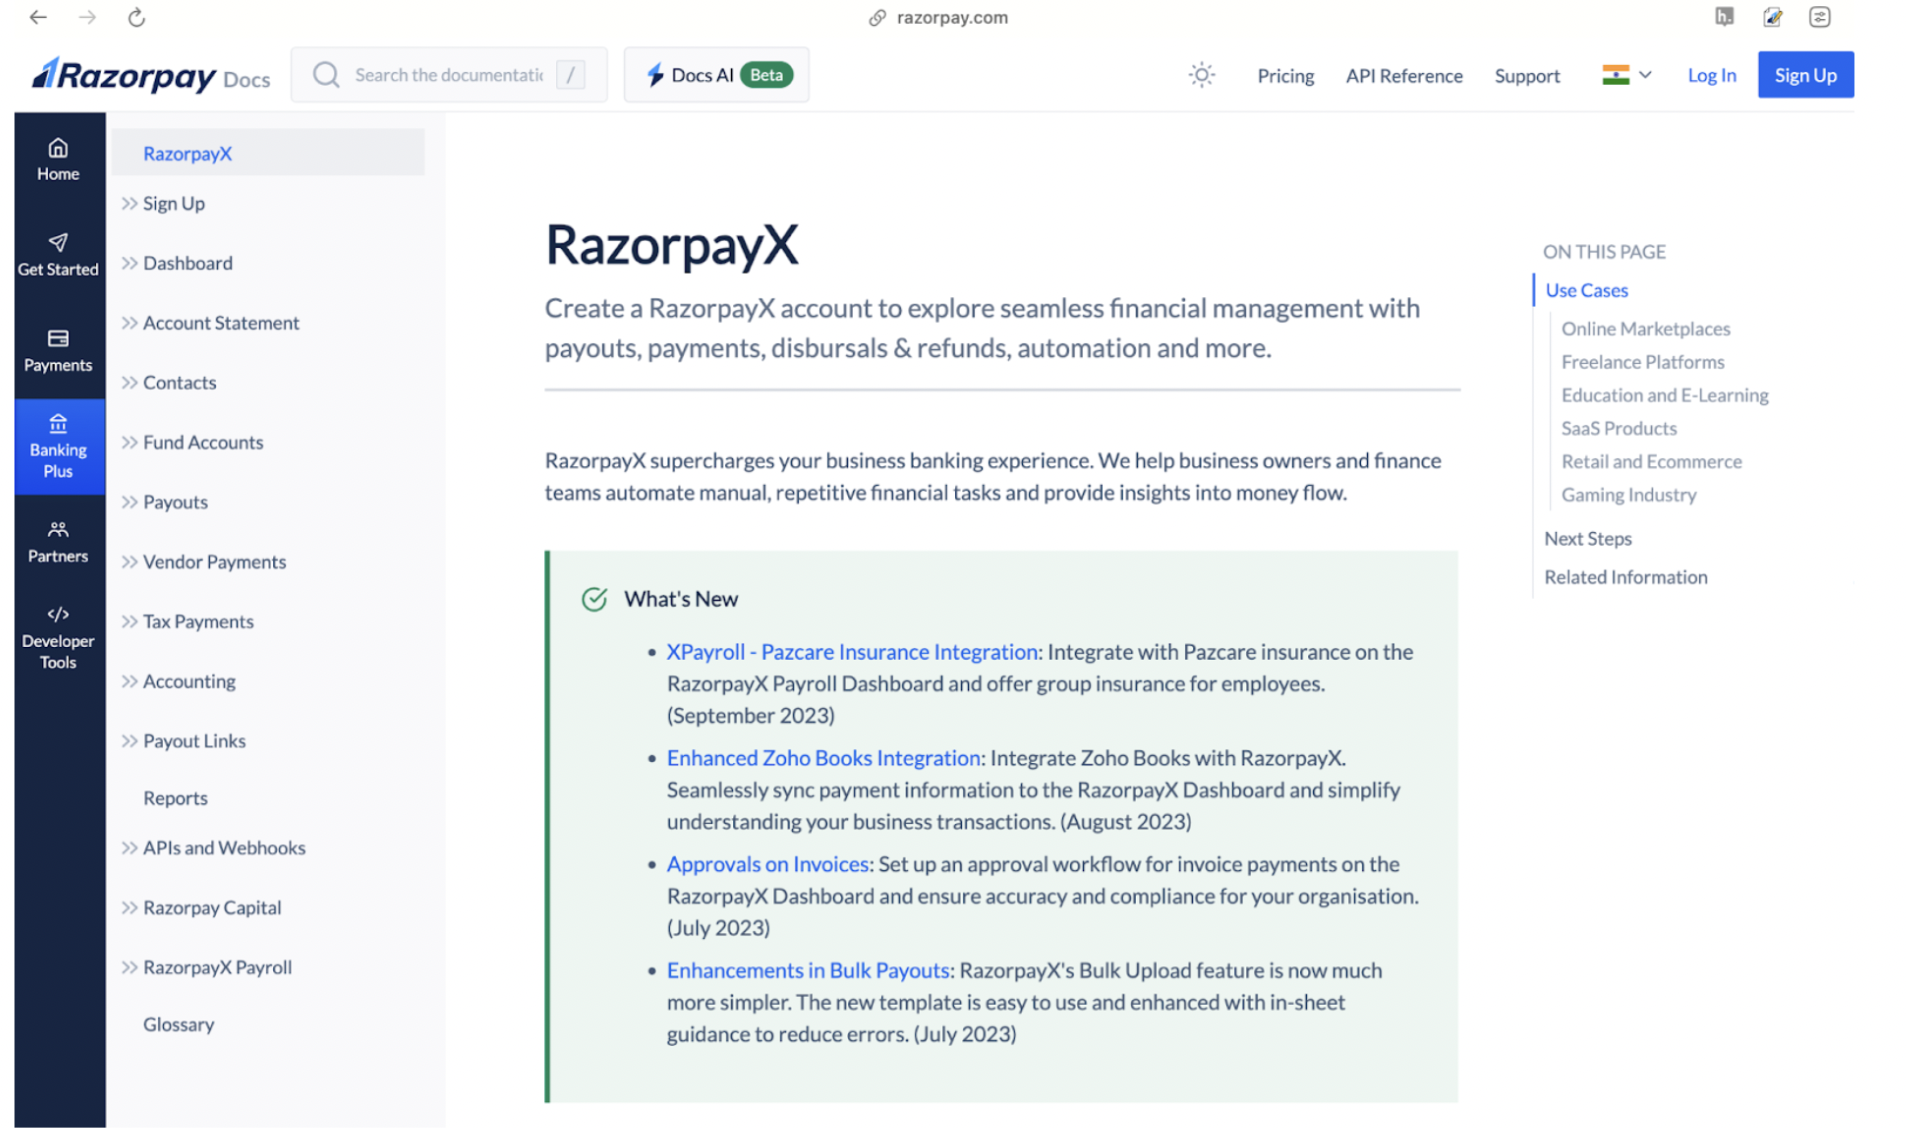 Image showing the home page of RazorpayX Documentation